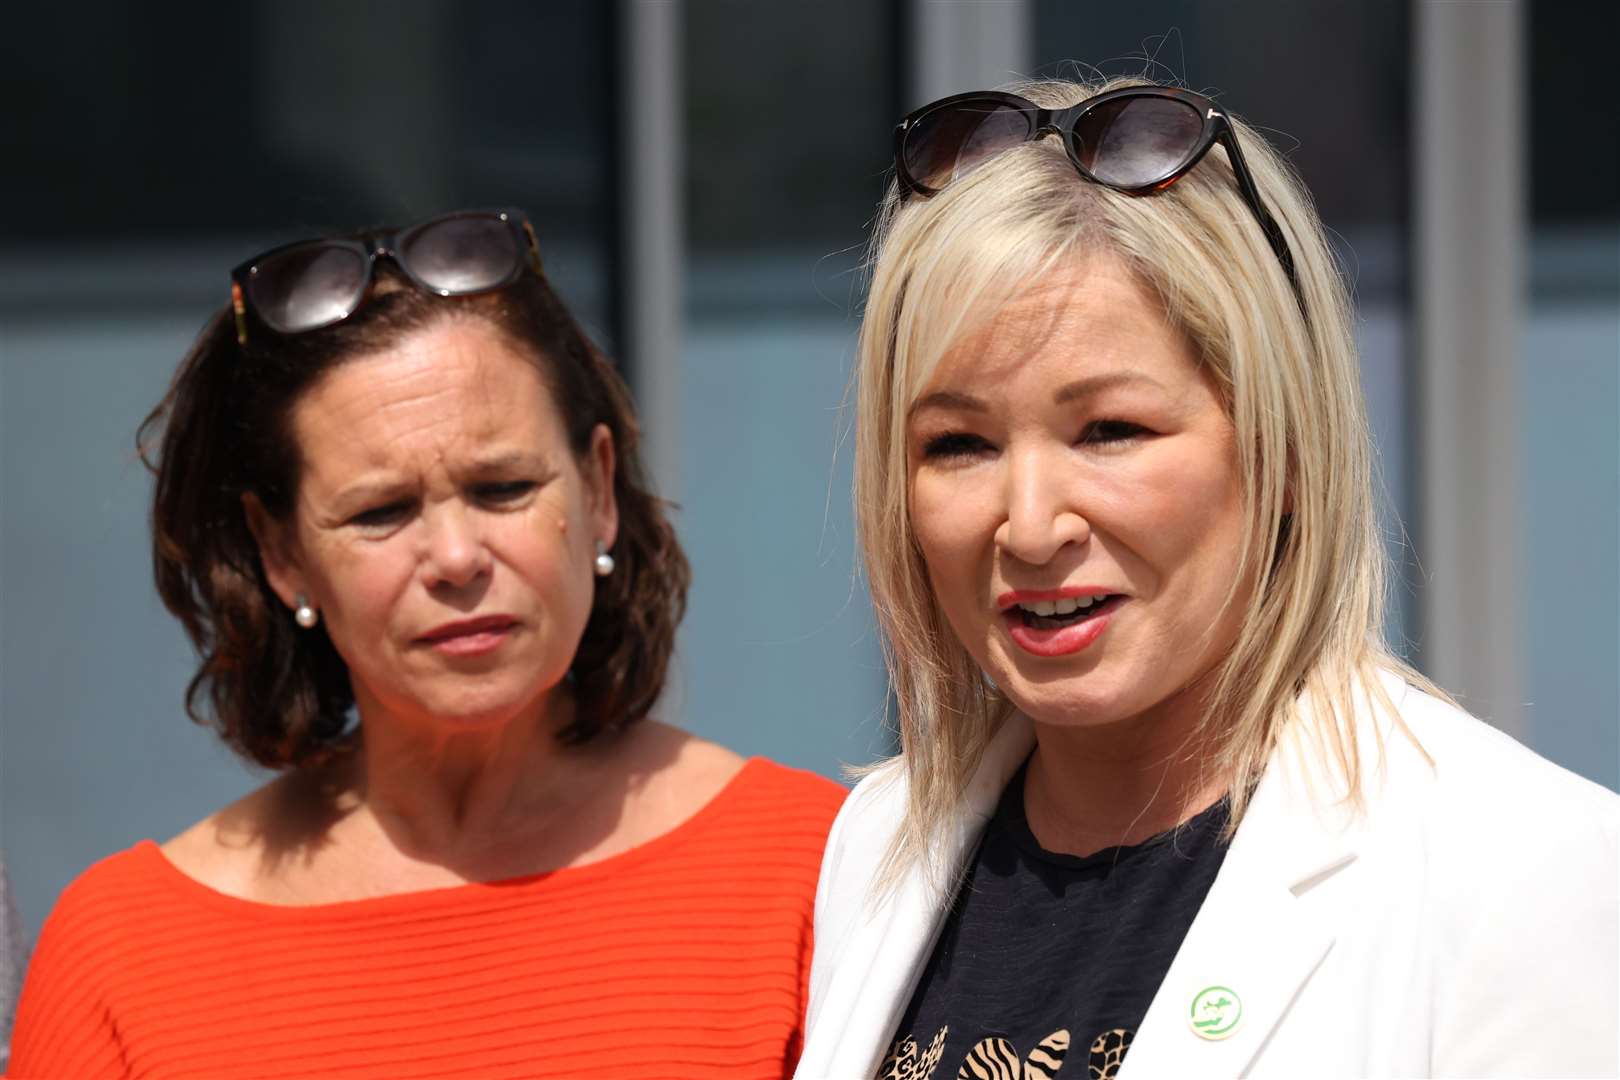 Sinn Fein’s president Mary Lou McDonald and vice president Michelle O’Neill speak to the media after addressing he party’s ruling council in Dublin (Sam Boal/PA)